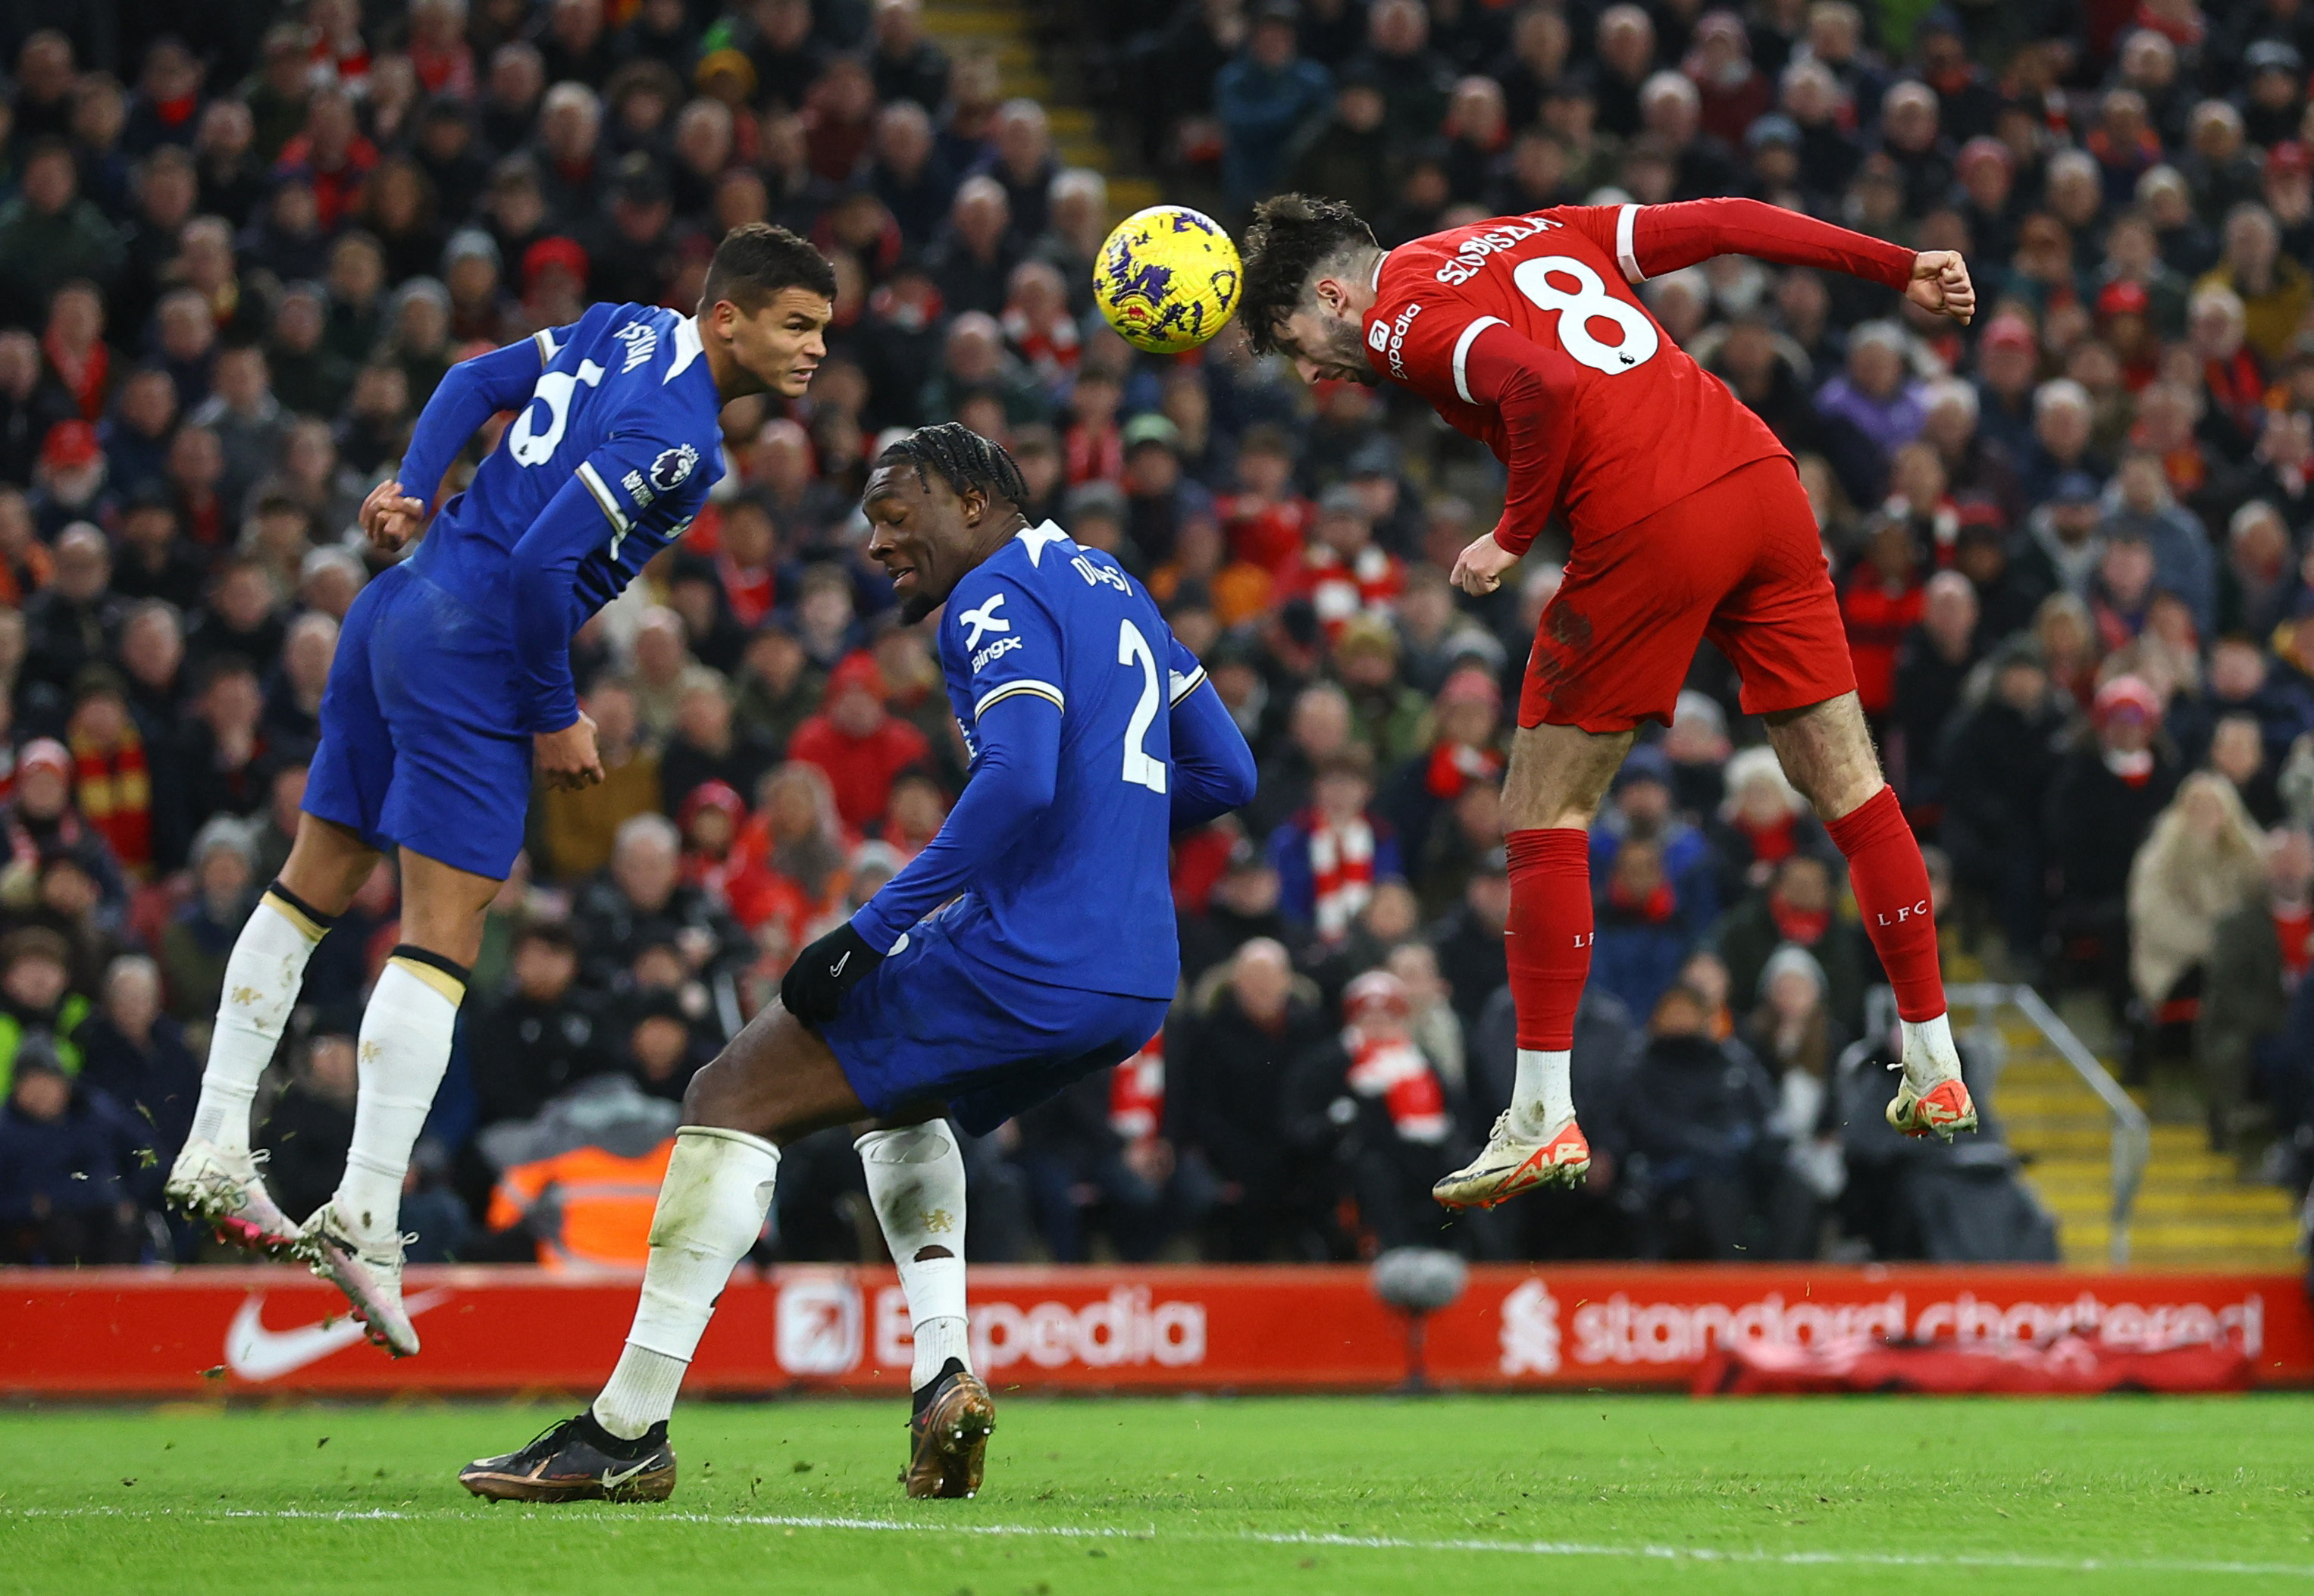 Liverpool move five points clear at the top after 4-1 rout of Chelsea |  Reuters